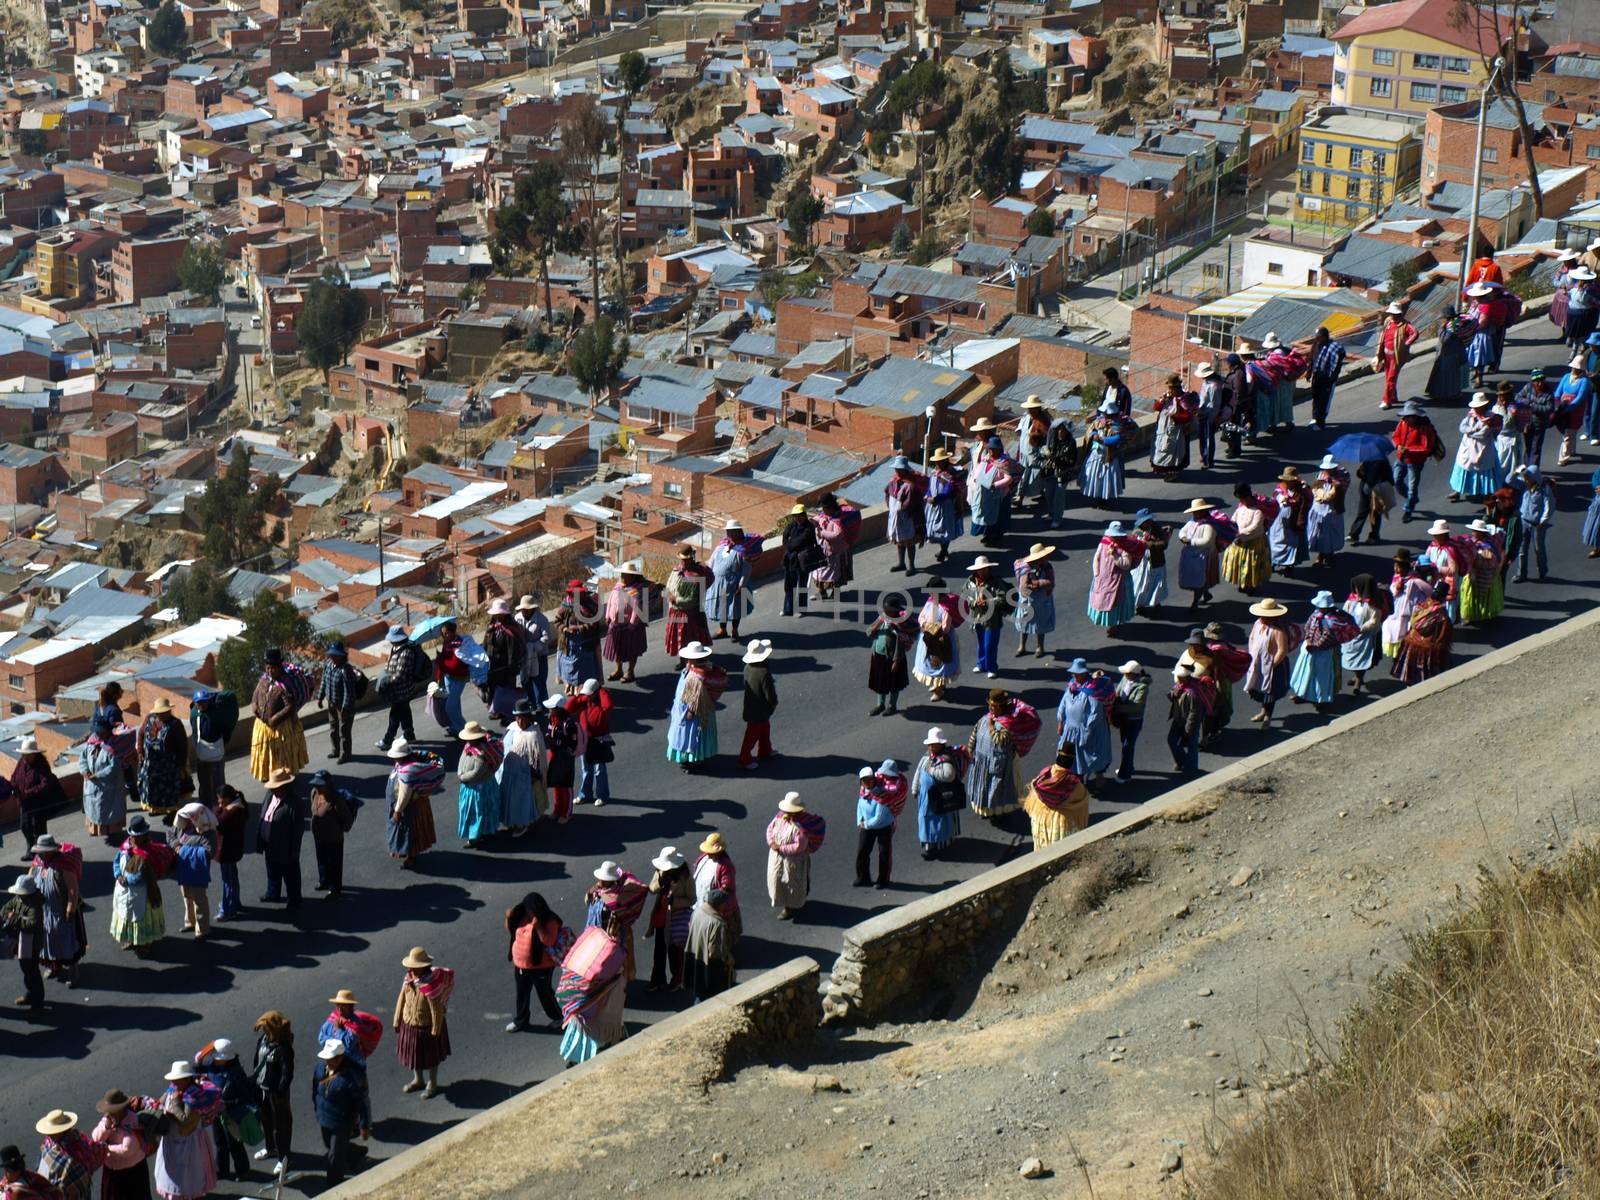 Parade in La Paz by pyty